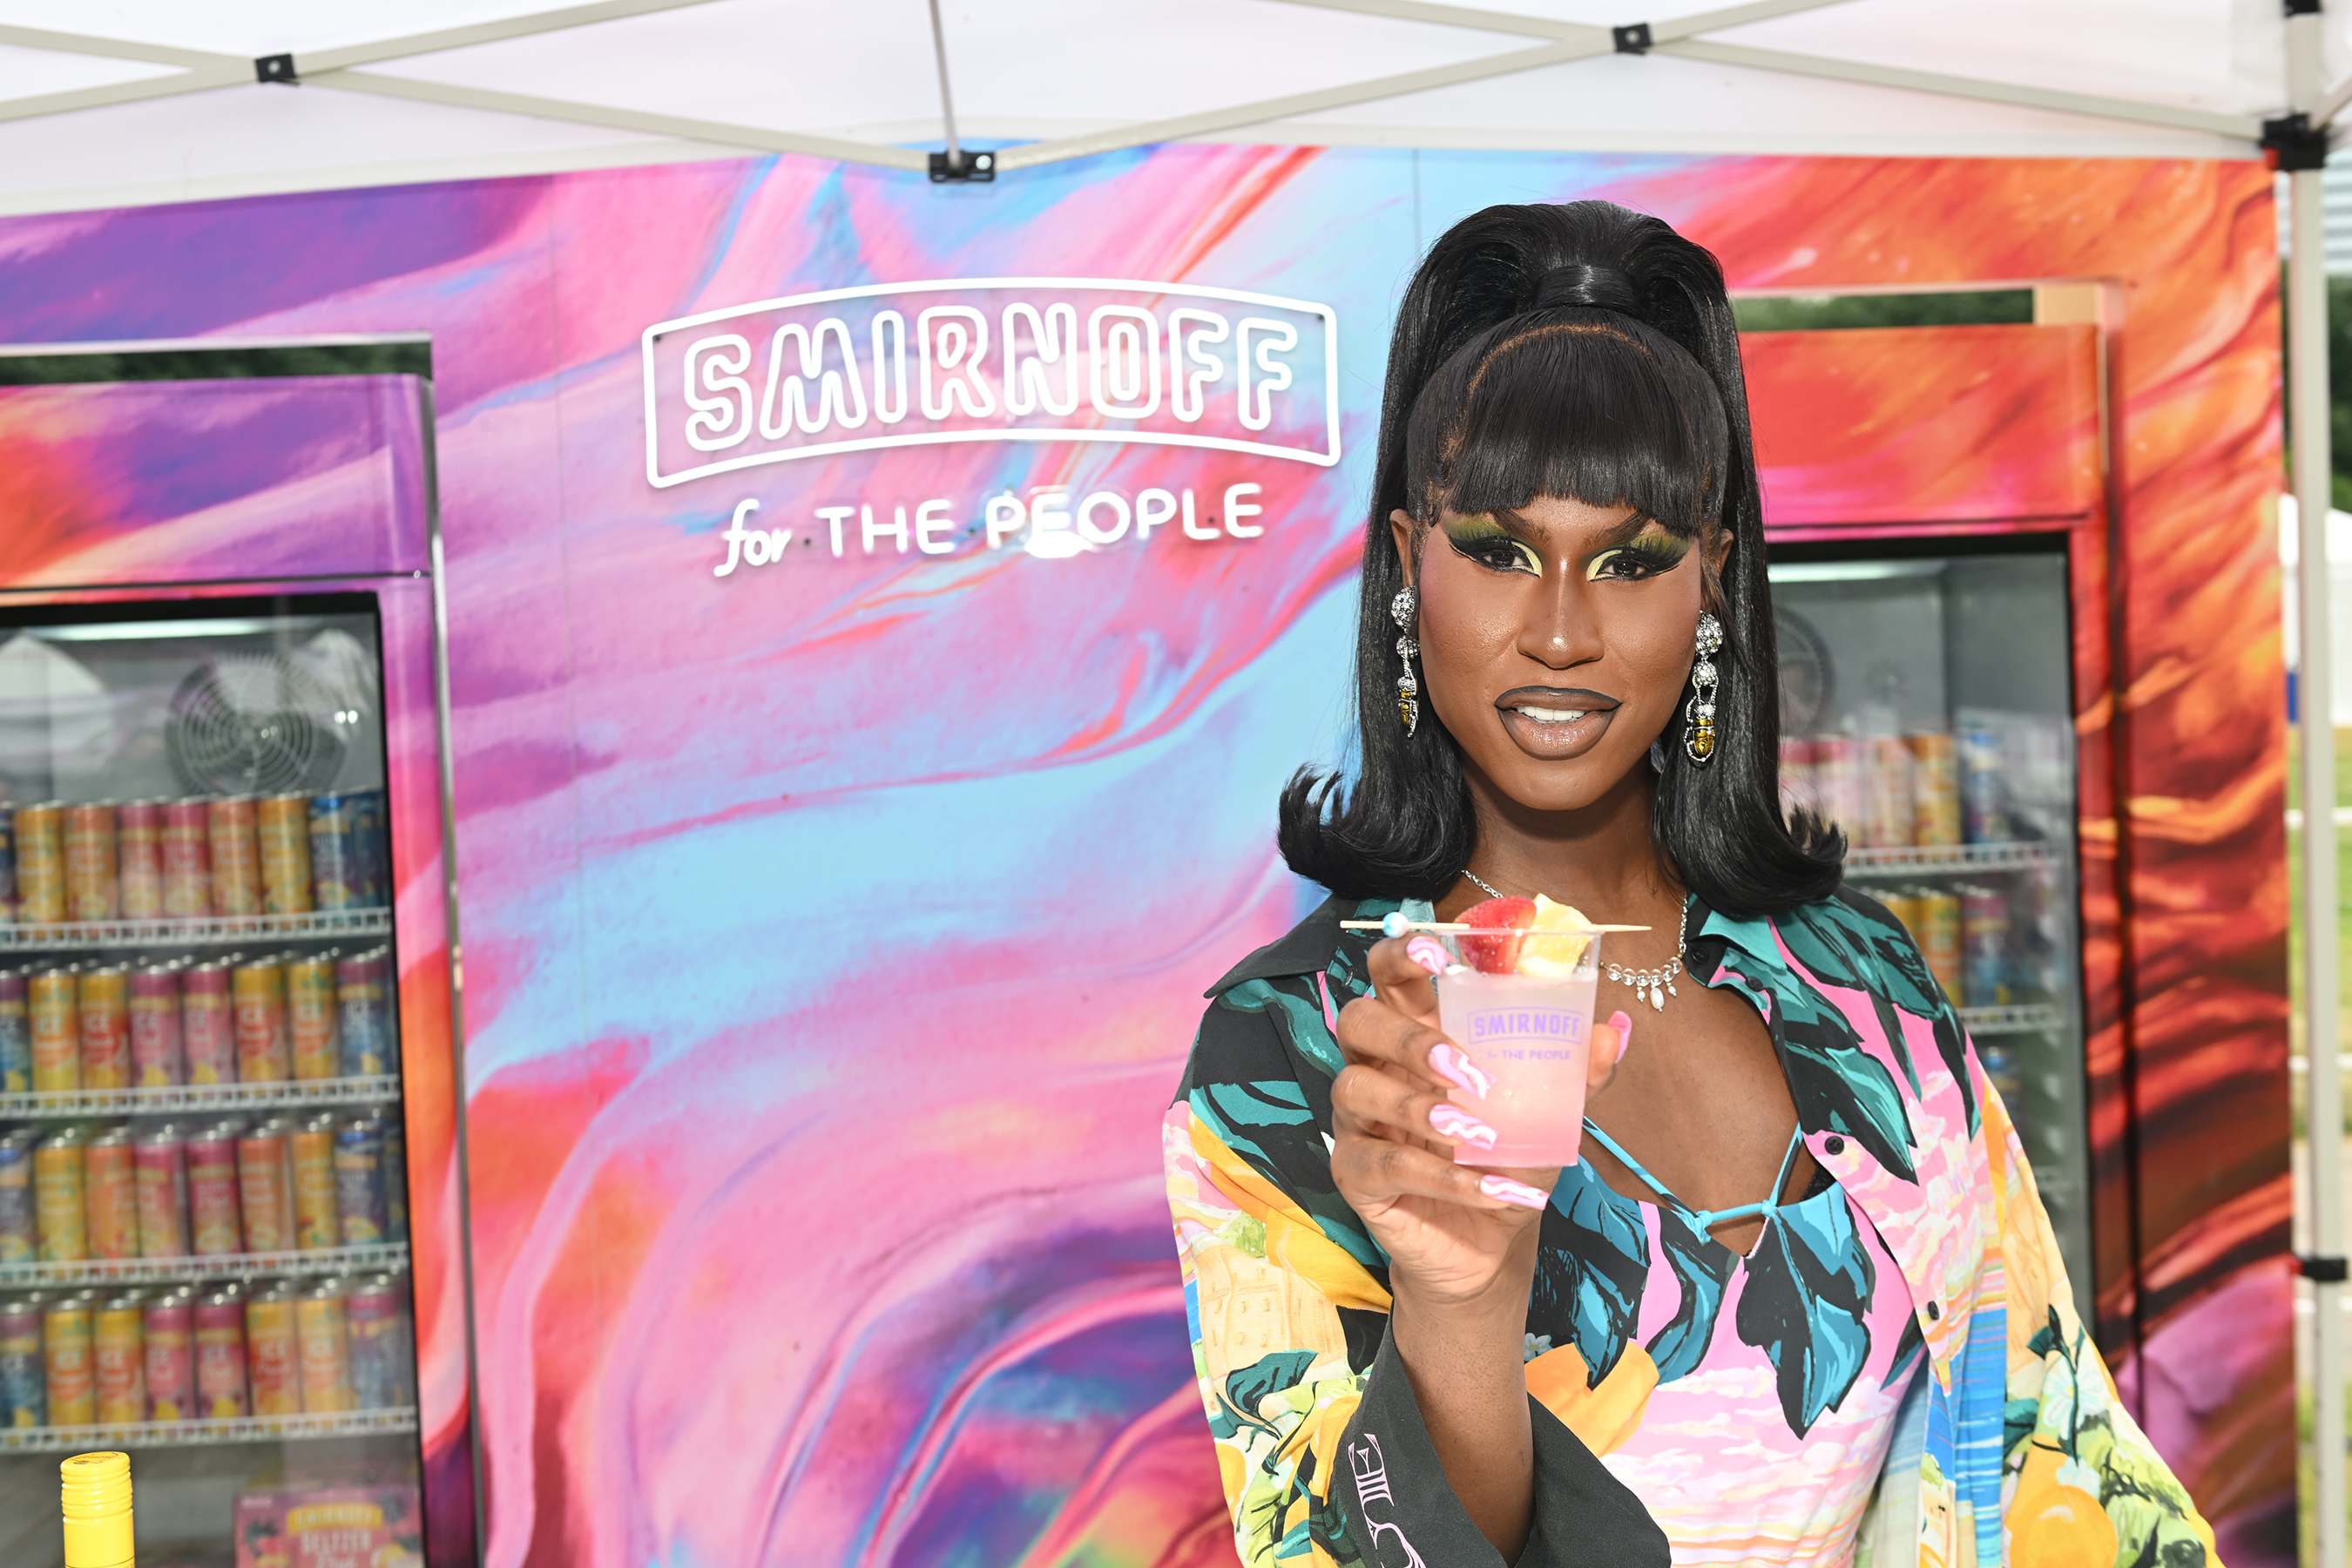 To announce Smirnoff’s Show Up. Show Off! national drag competition, Shea Couleé werked Chicago’s annual Pride in the Park event to kick off the inclusive fun.